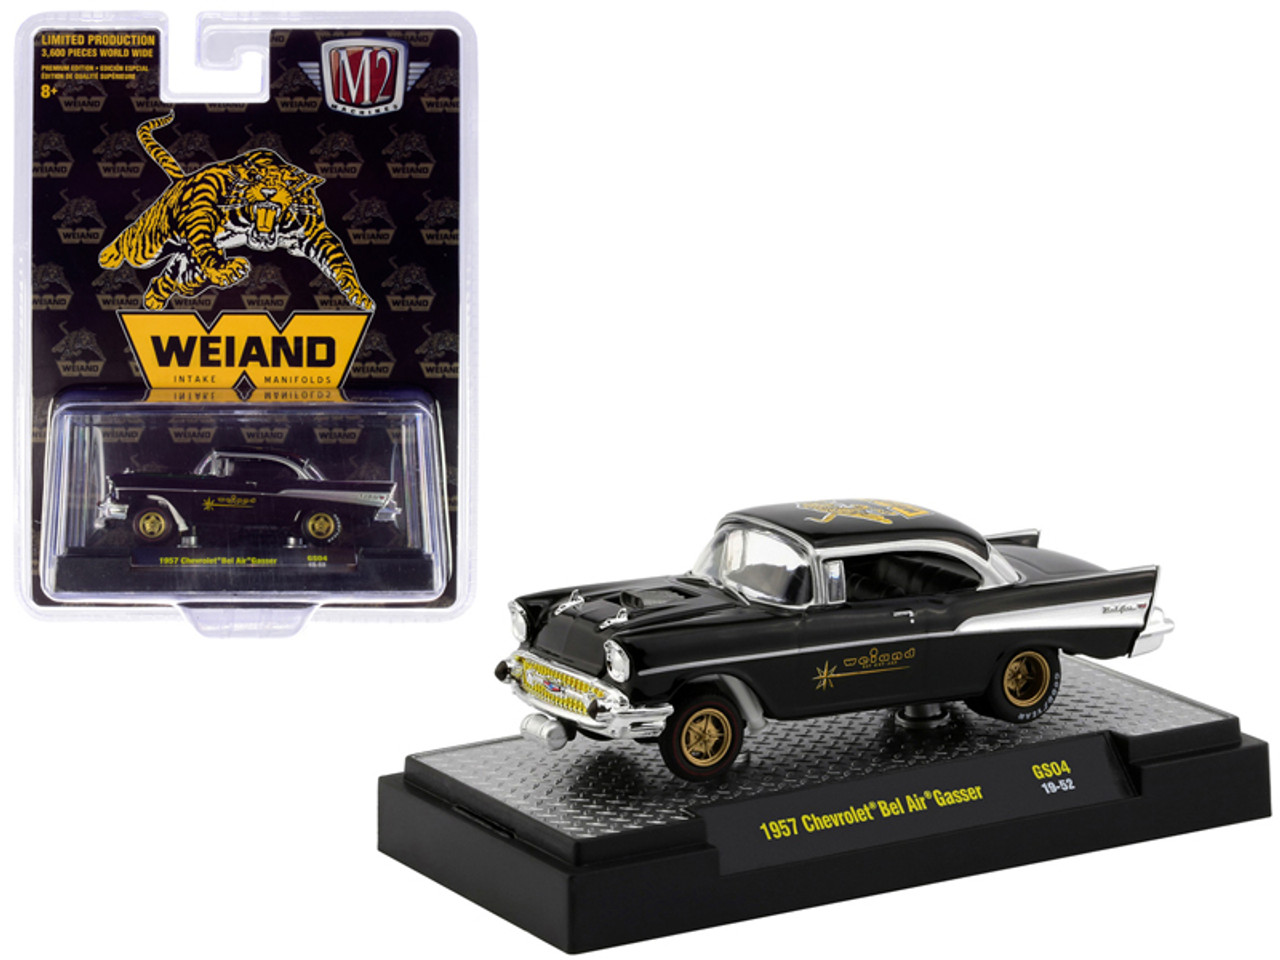 1957 Chevrolet Bel Air Gasser Black "Weiand" "Hobby Exclusive" Limited Edition to 3600 pieces Worldwide 1/64 Diecast Model Car by M2 Machines